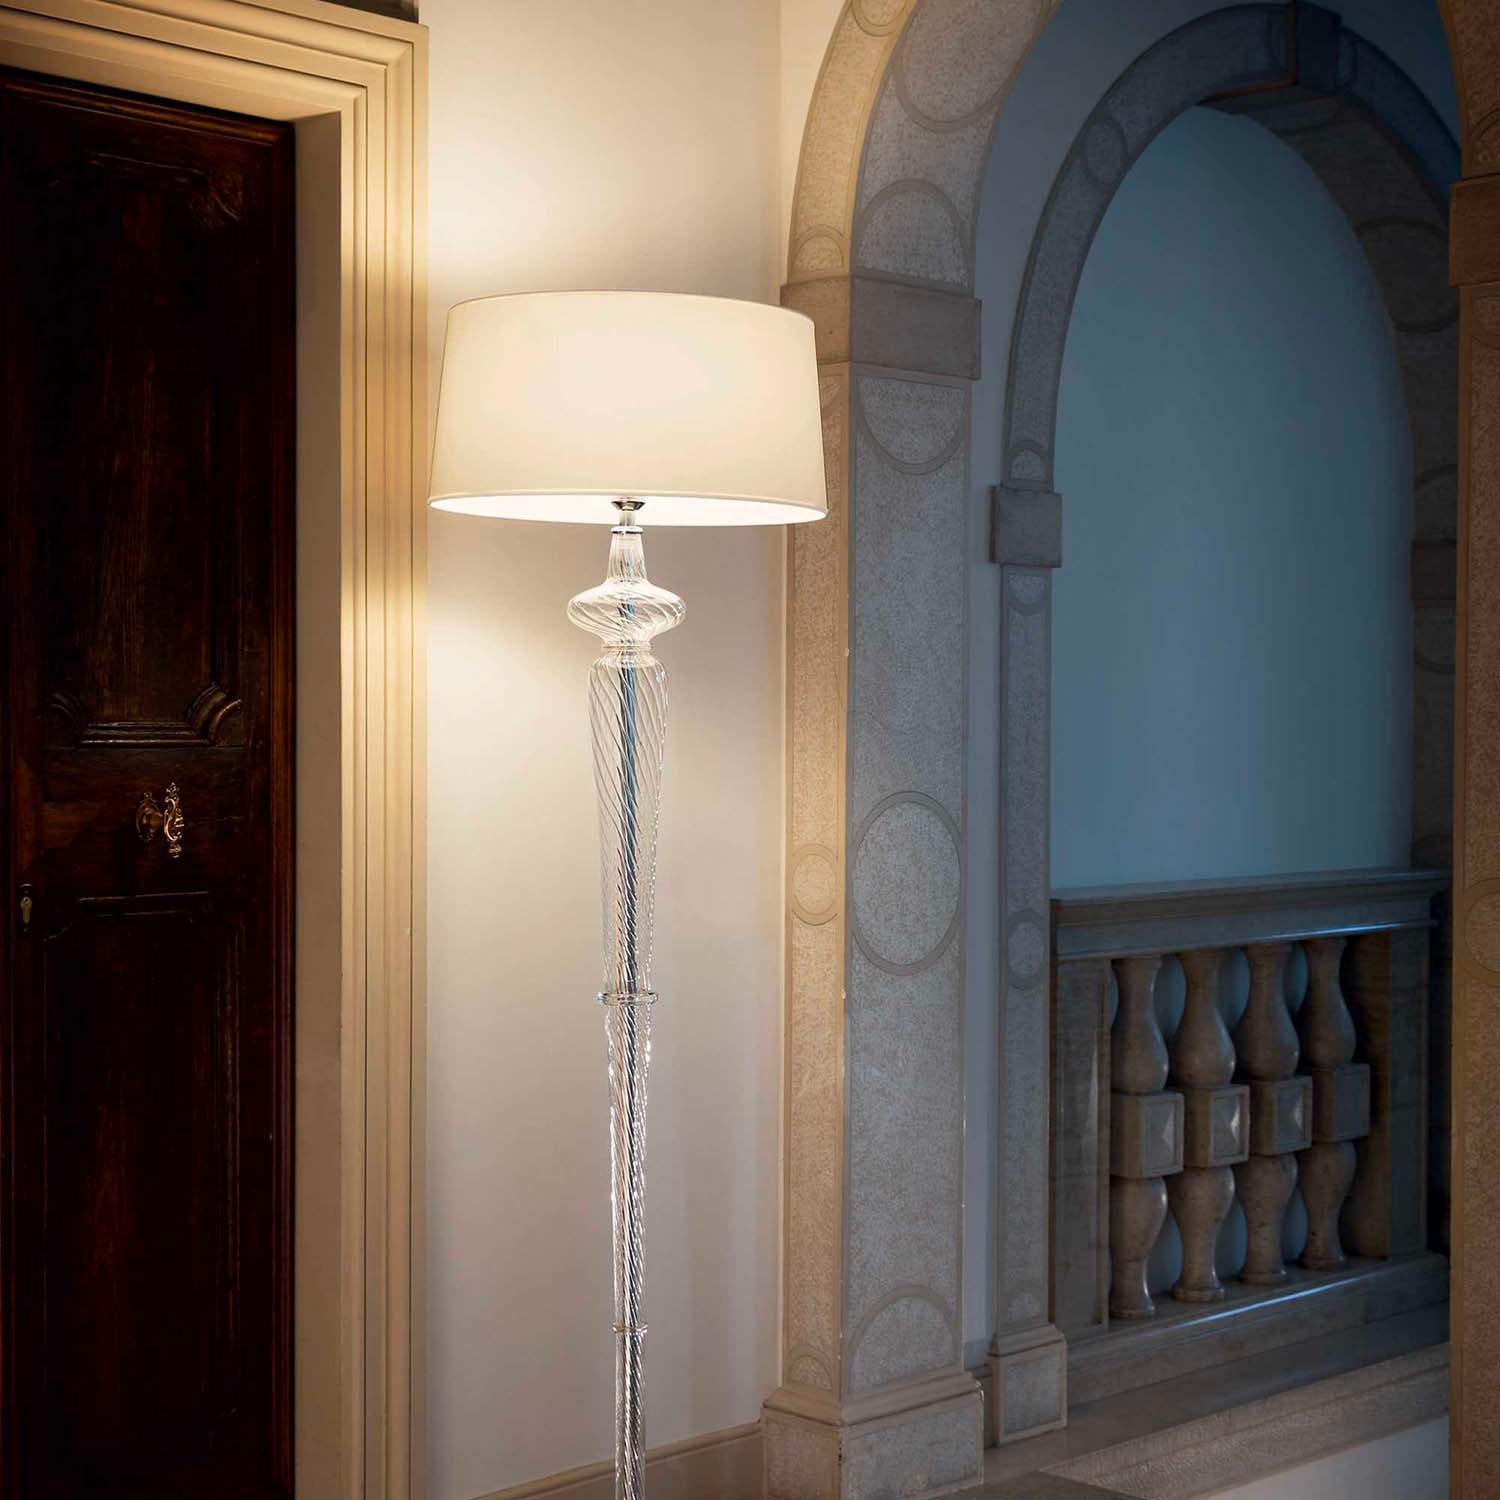 FORCOLA - Baroque floor lamp in glass and fabric lampshade